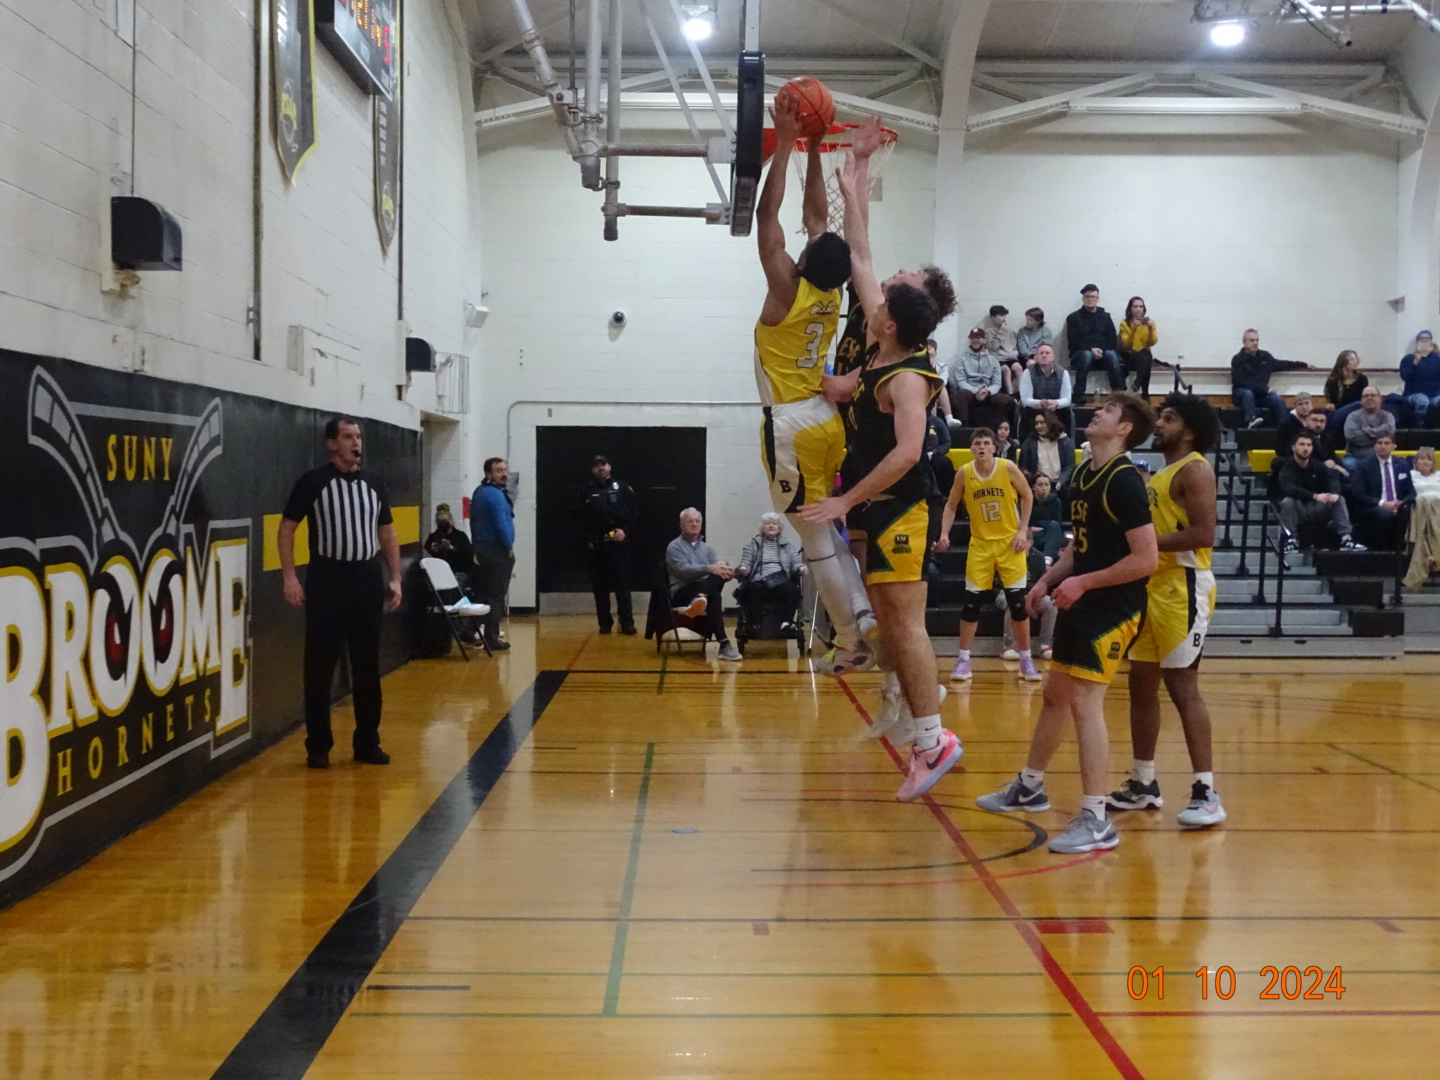 Broome player attempting a dunk against defenders